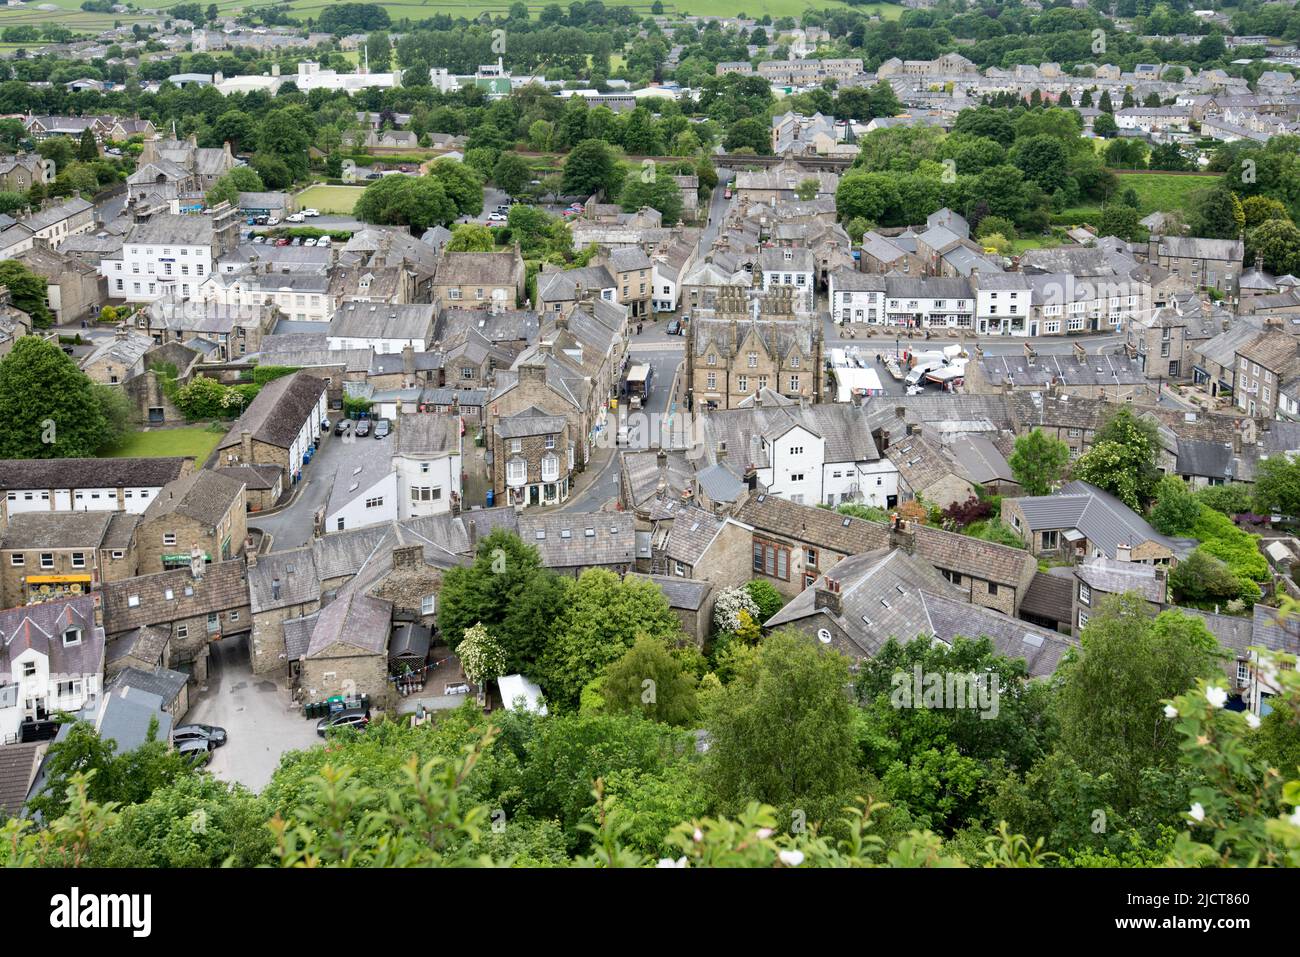 The market town of Settle on 14th June 2022 (Tuesday Market day), seen from the top viewing point on Castlbergh Hill Stock Photo